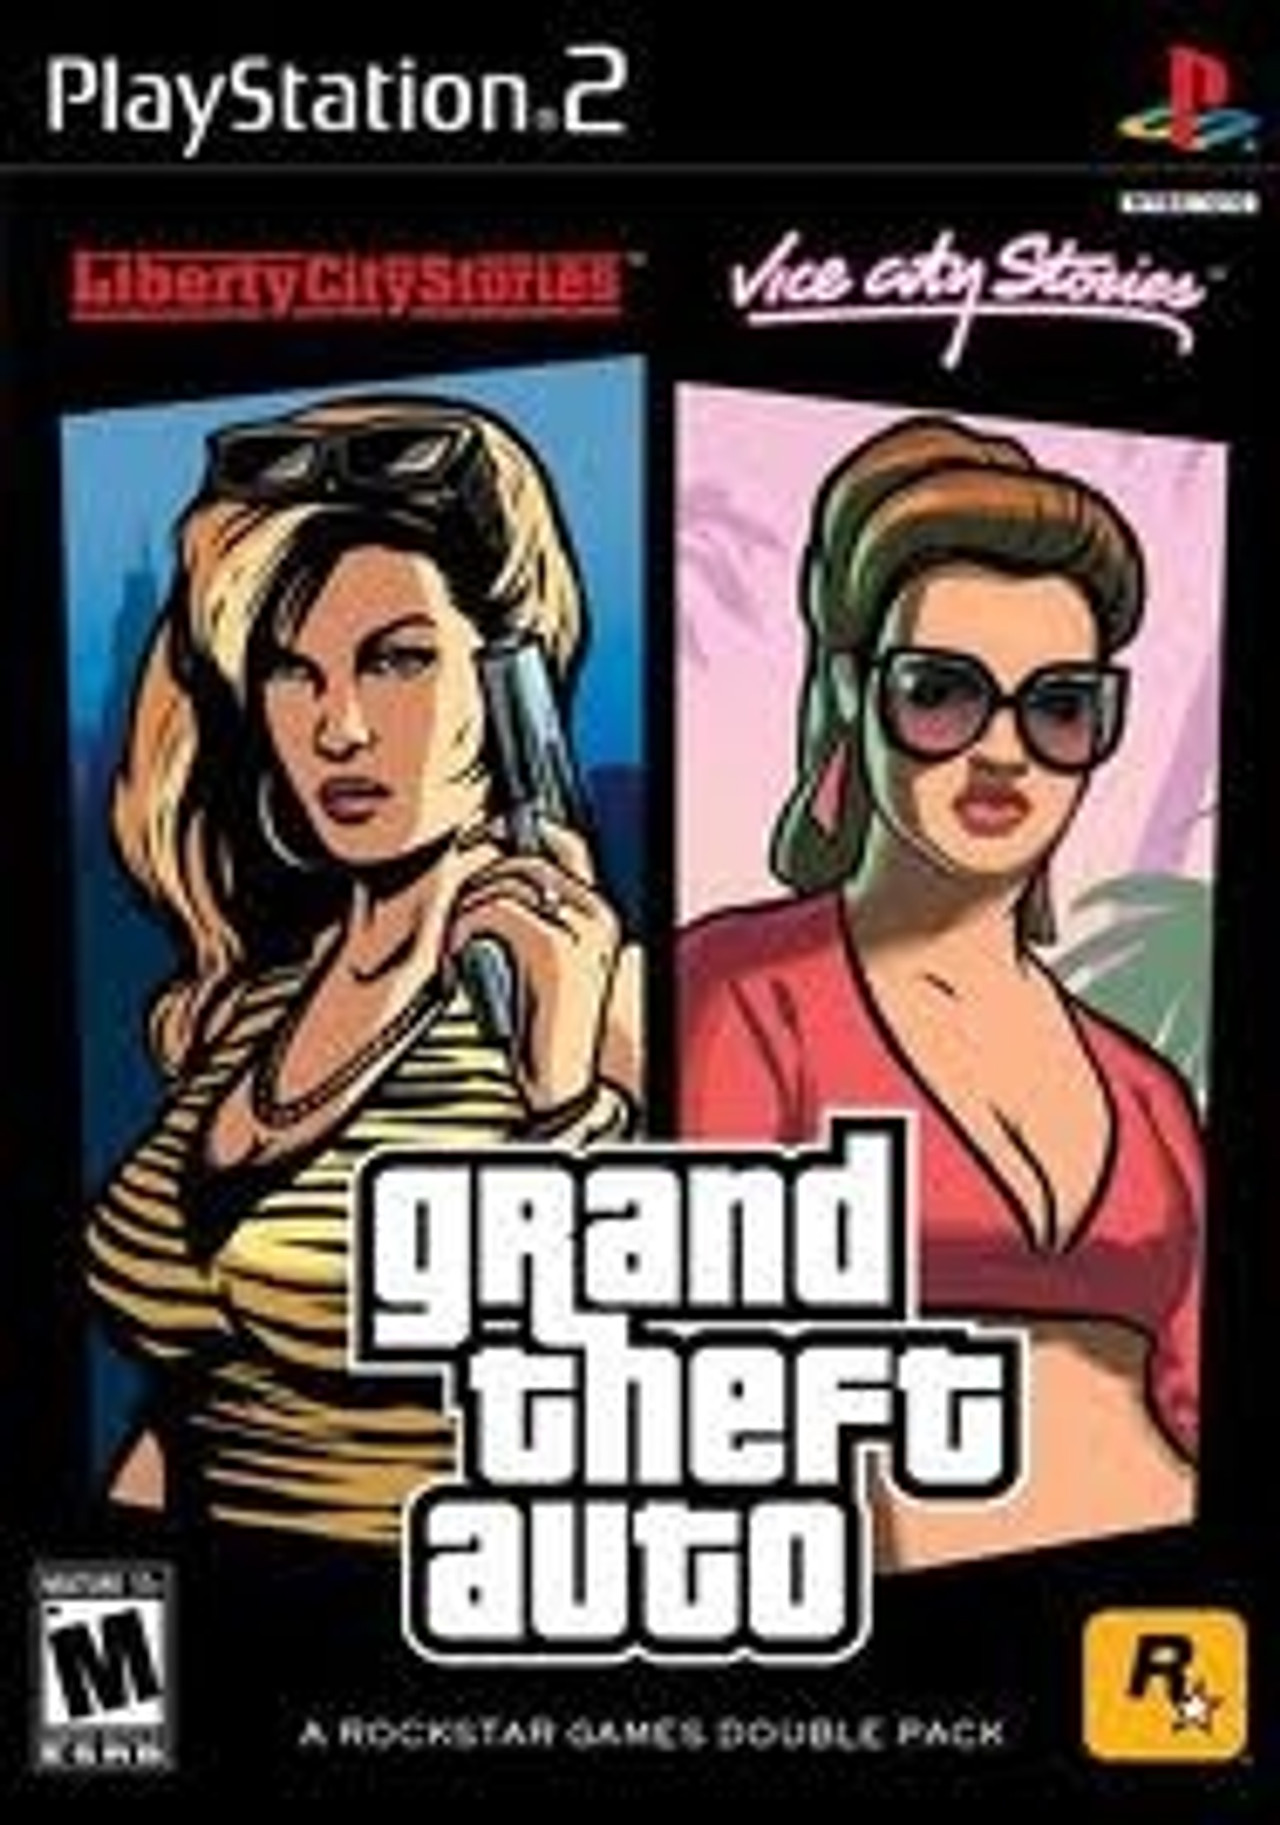 Gta Double Pack Liberty City Vice City Stories Ps2 Game For Sale Dkoldies